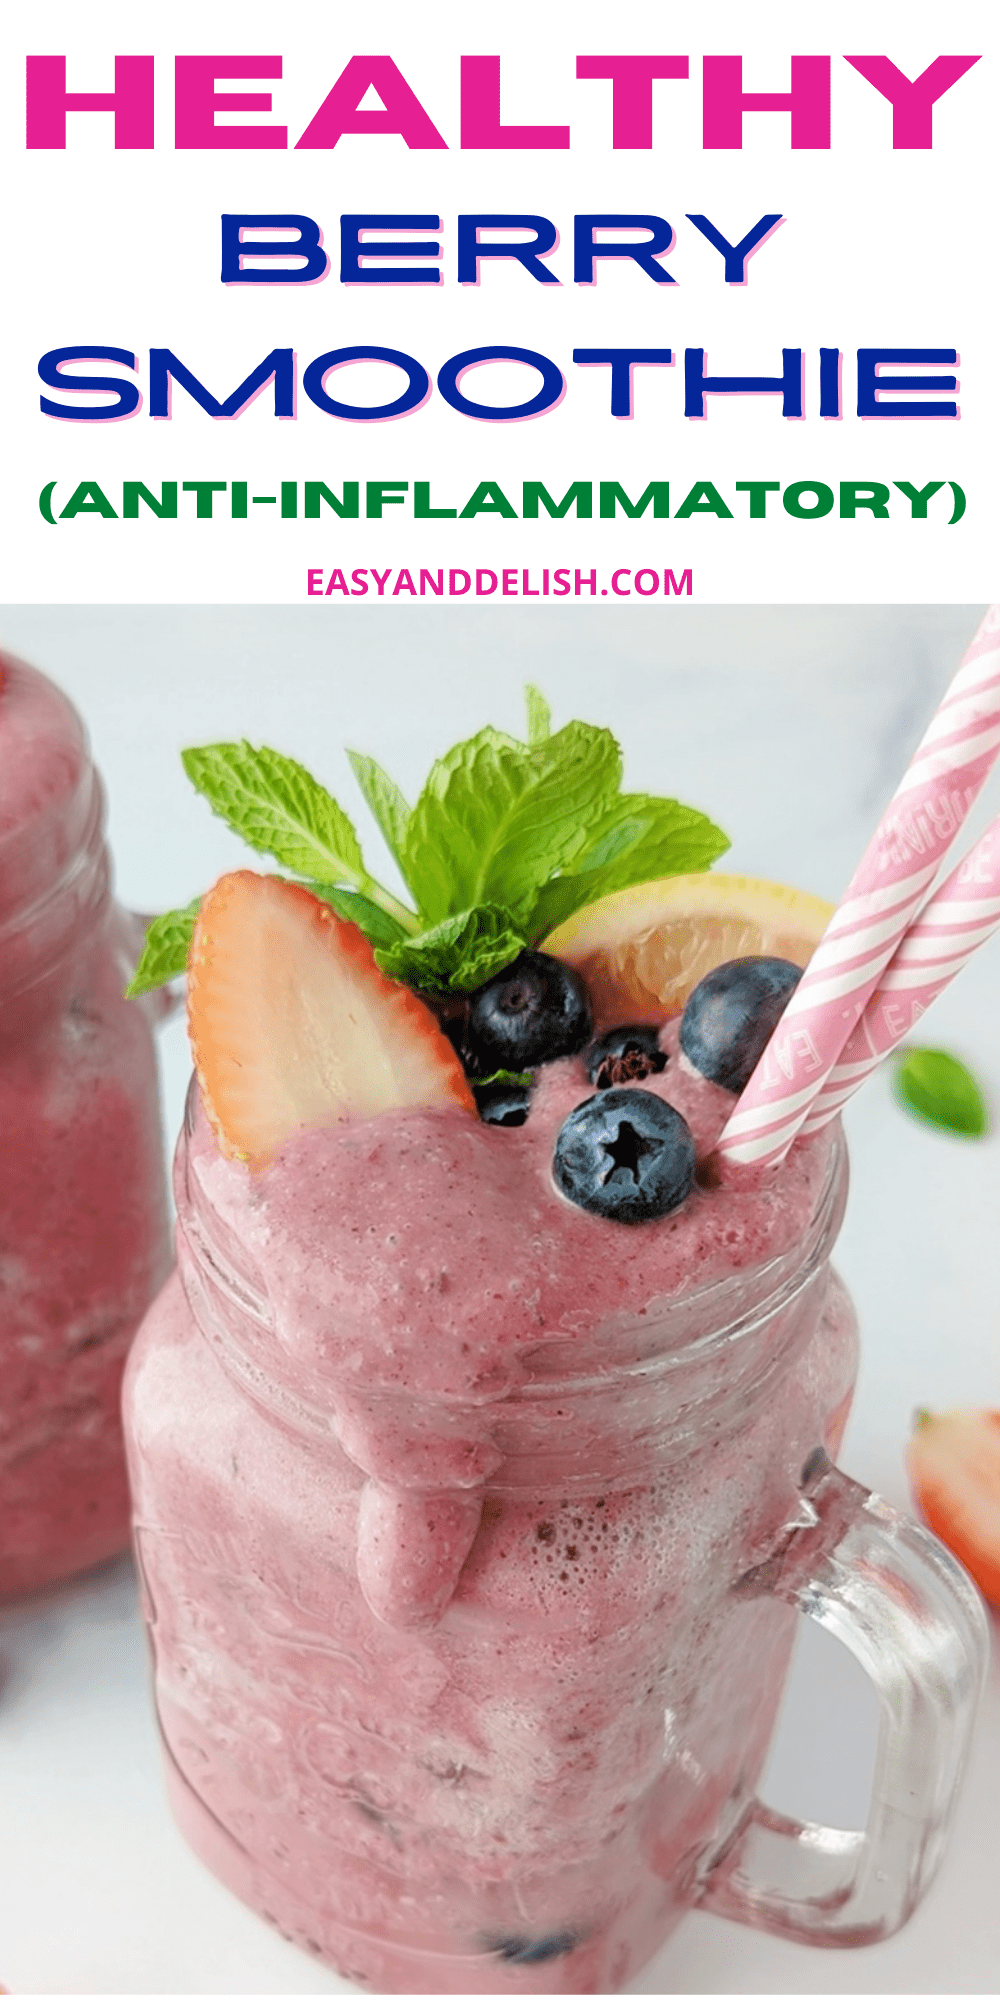 pin of anti-inflammatory berry smoothie garnished with mint, lemon,a nd mixed berries.